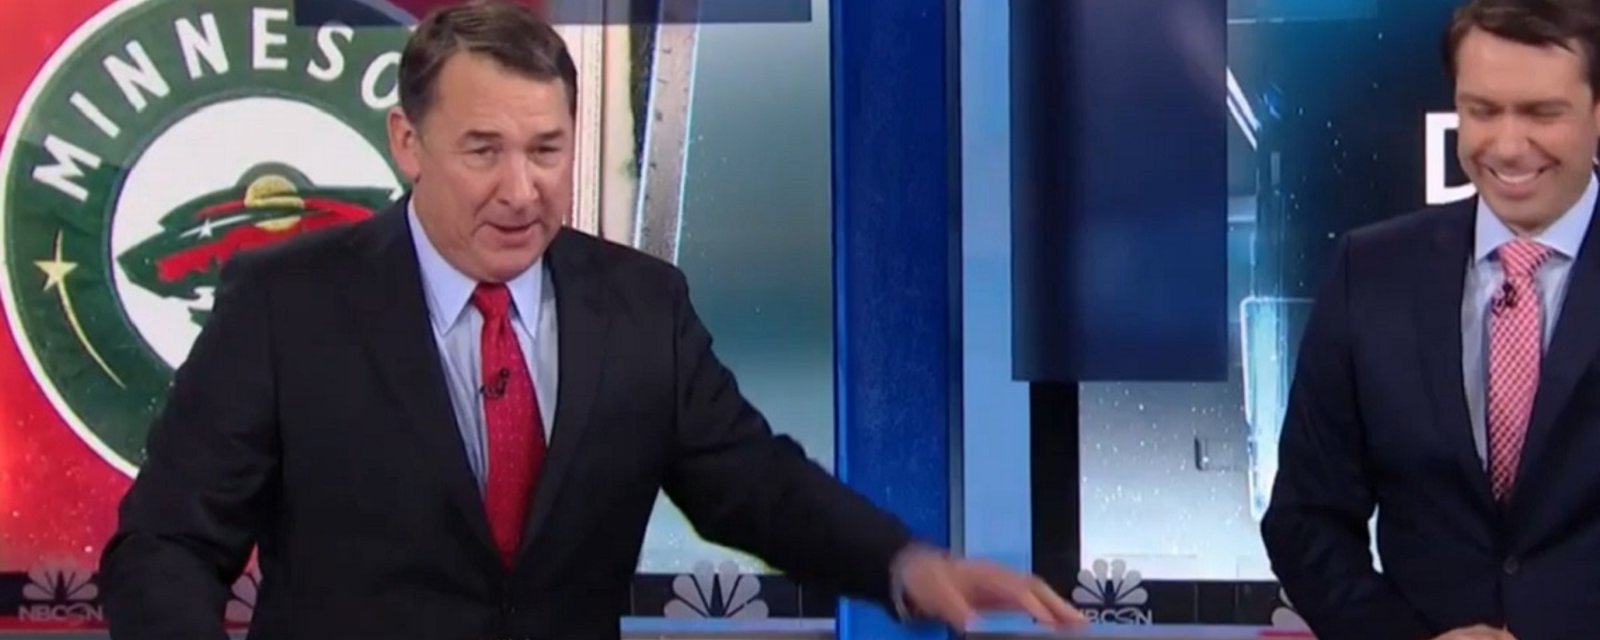 Mike Milbury destroyed on social media after insulting P.K. Subban.